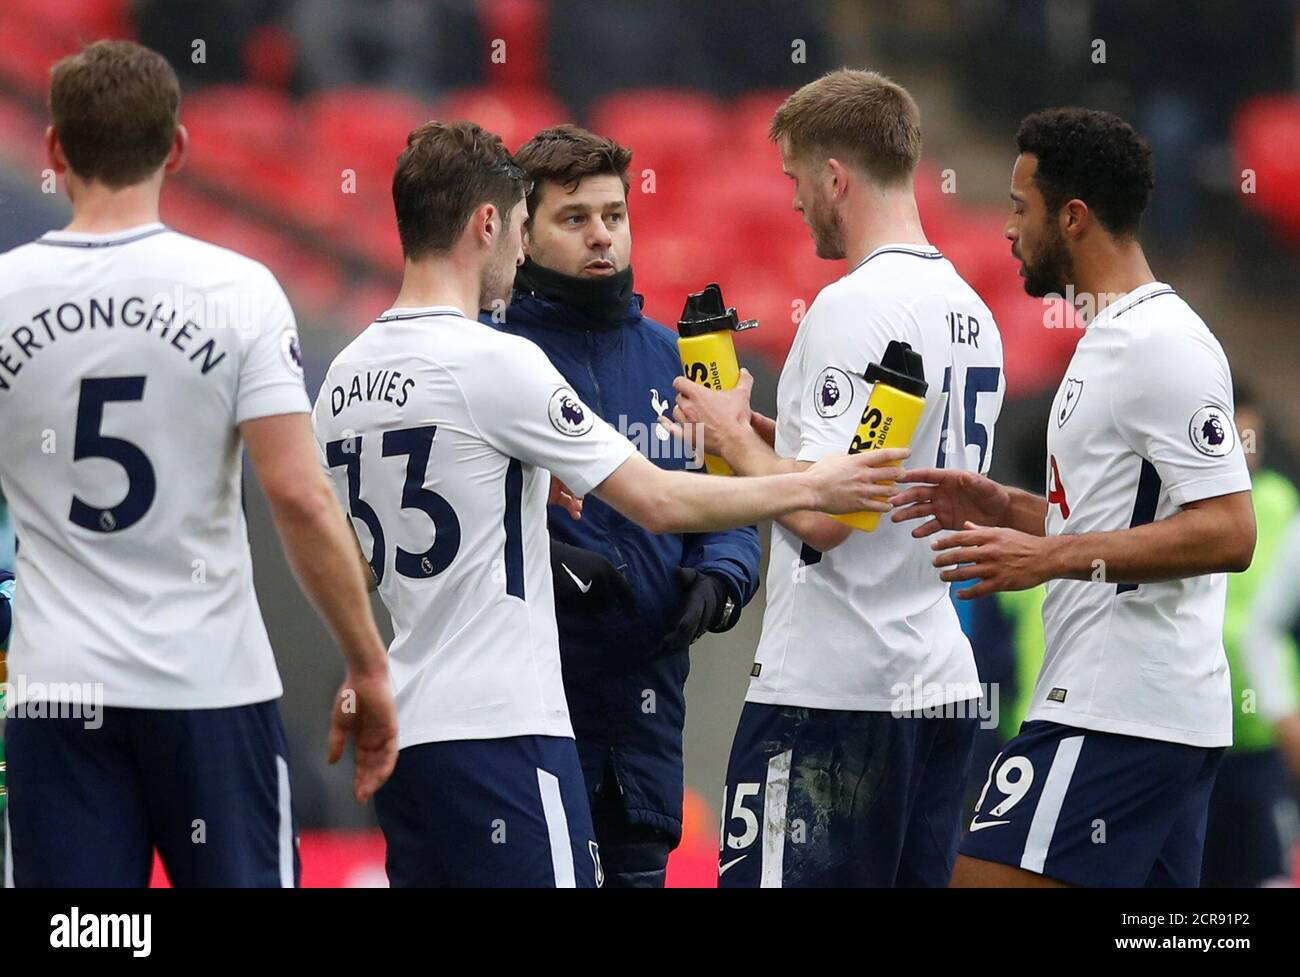 Soccer Football - Premier League - Tottenham Hotspur vs Huddersfield Town - Wembley Stadium, London, Britain - March 3, 2018   Tottenham manager Mauricio Pochettino with Eric Dier, Ben Davies, Jan Vertonghen and Mousa Dembele    REUTERS/Eddie Keogh    EDITORIAL USE ONLY. No use with unauthorized audio, video, data, fixture lists, club/league logos or 'live' services. Online in-match use limited to 75 images, no video emulation. No use in betting, games or single club/league/player publications.  Please contact your account representative for further details. Stock Photo